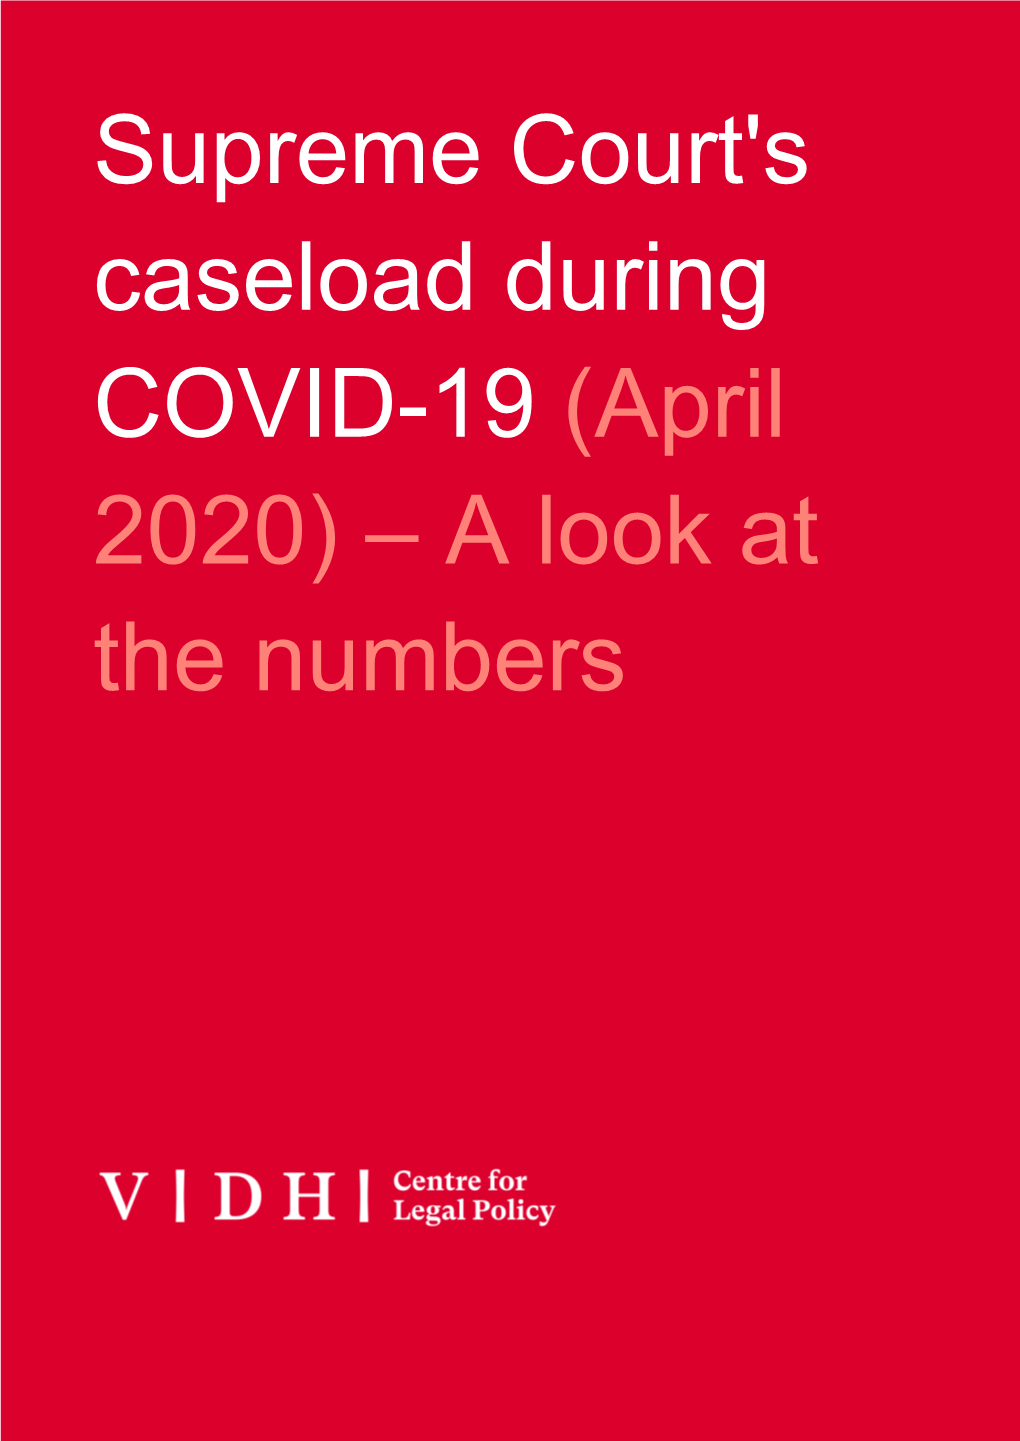 Supreme Court's Caseload During COVID-19 (April 2020) – a Look at the Numbers